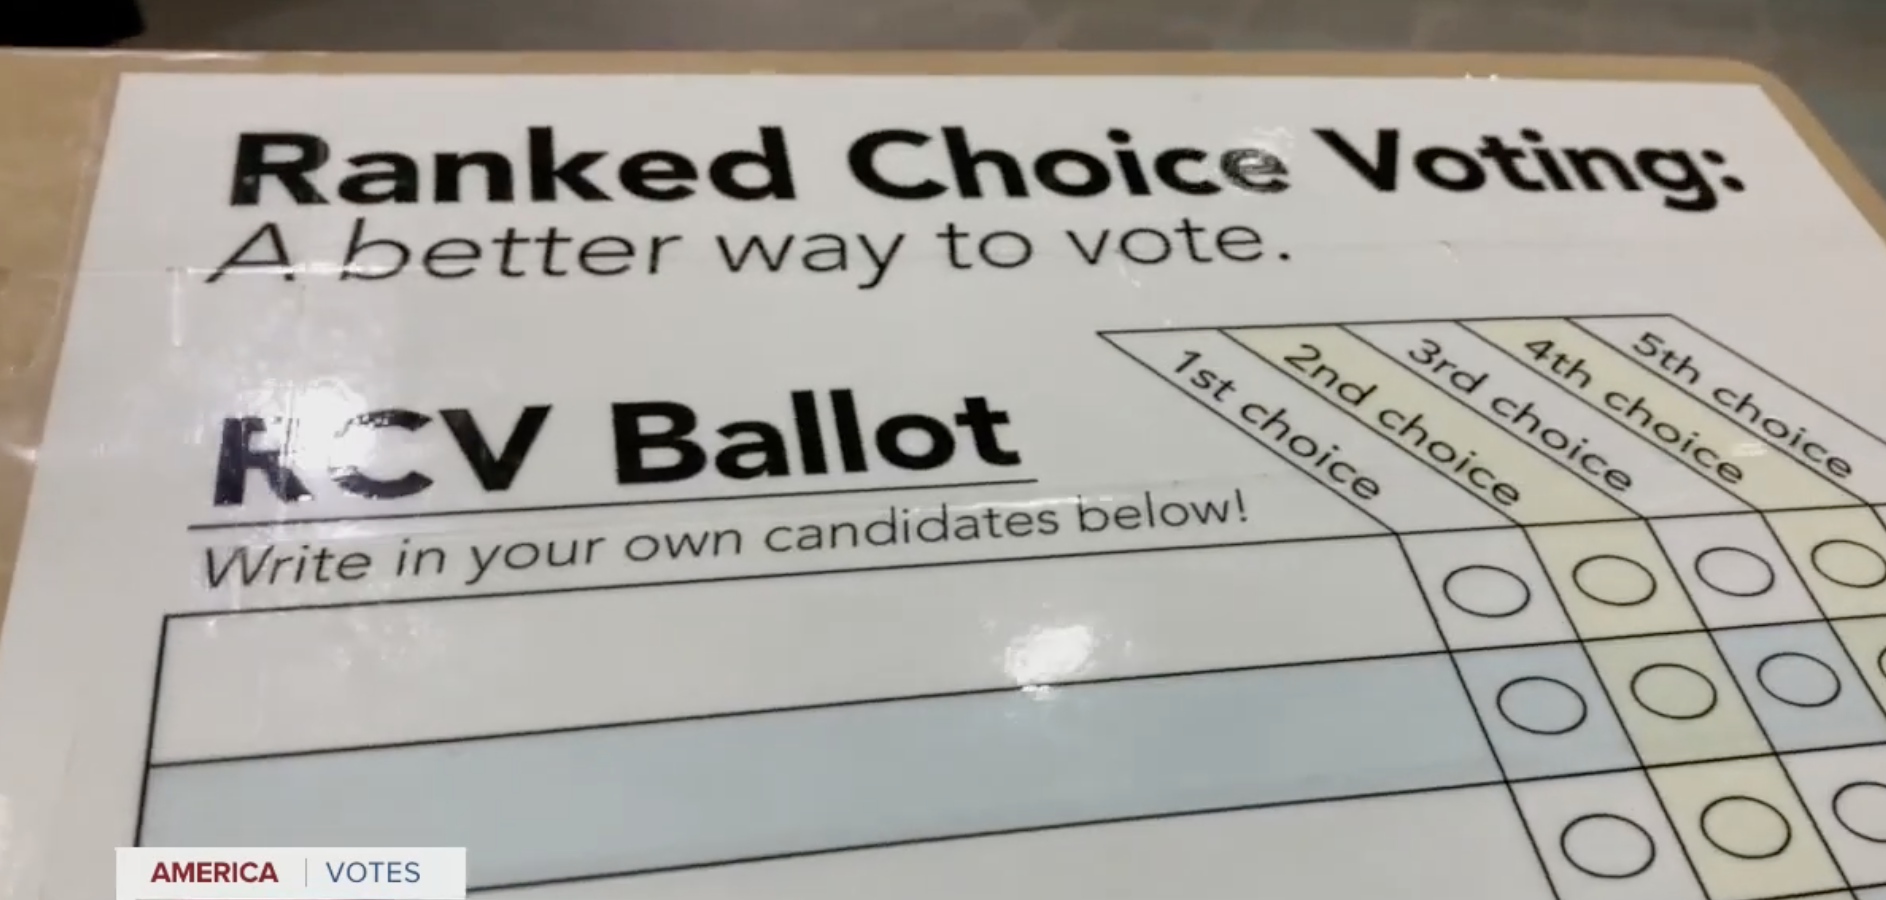 Maine Republicans won’t recognize ranked choice voting in presidential primary